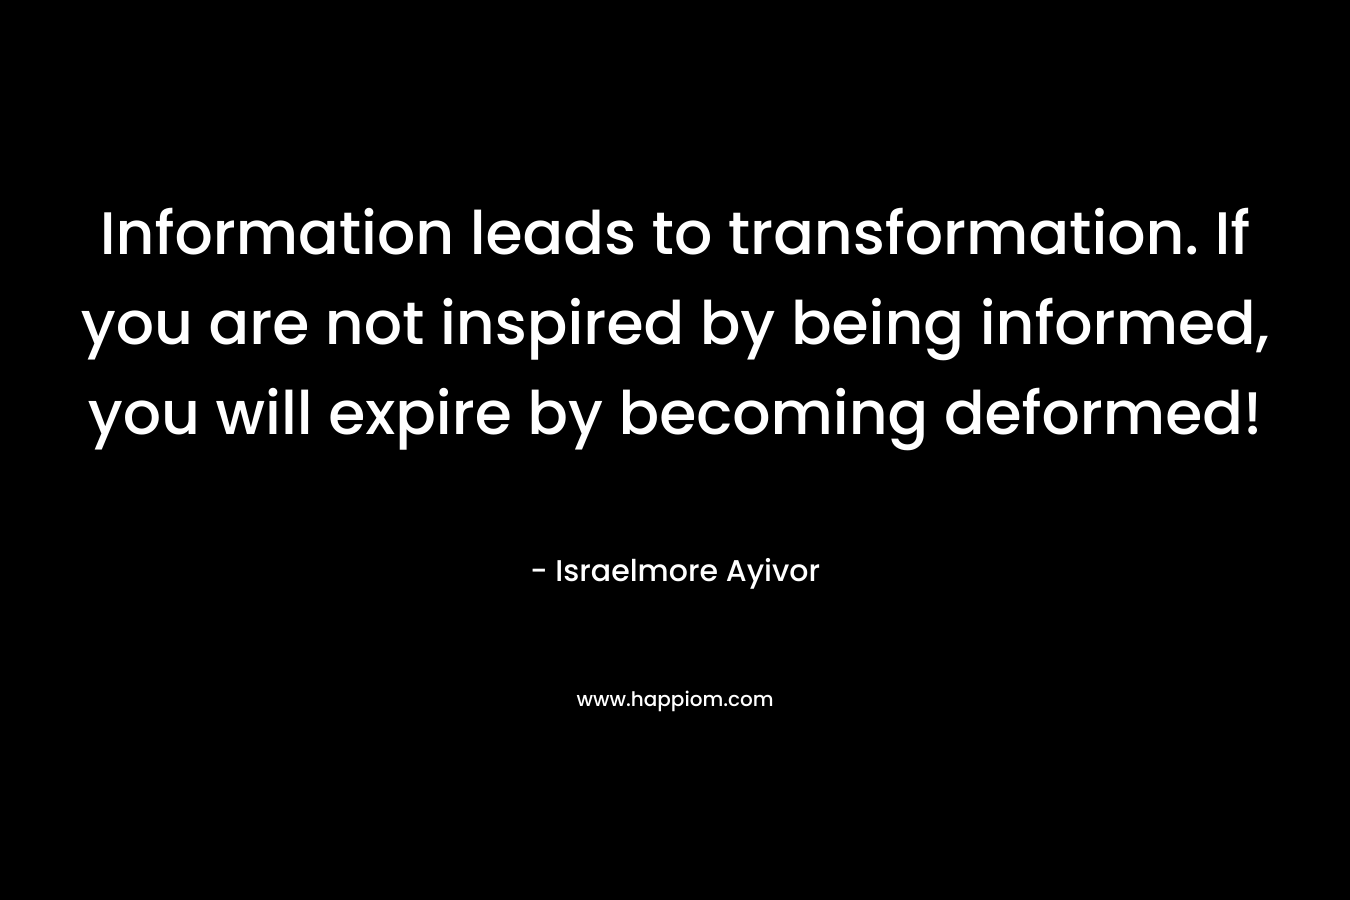 Information leads to transformation. If you are not inspired by being informed, you will expire by becoming deformed! – Israelmore Ayivor